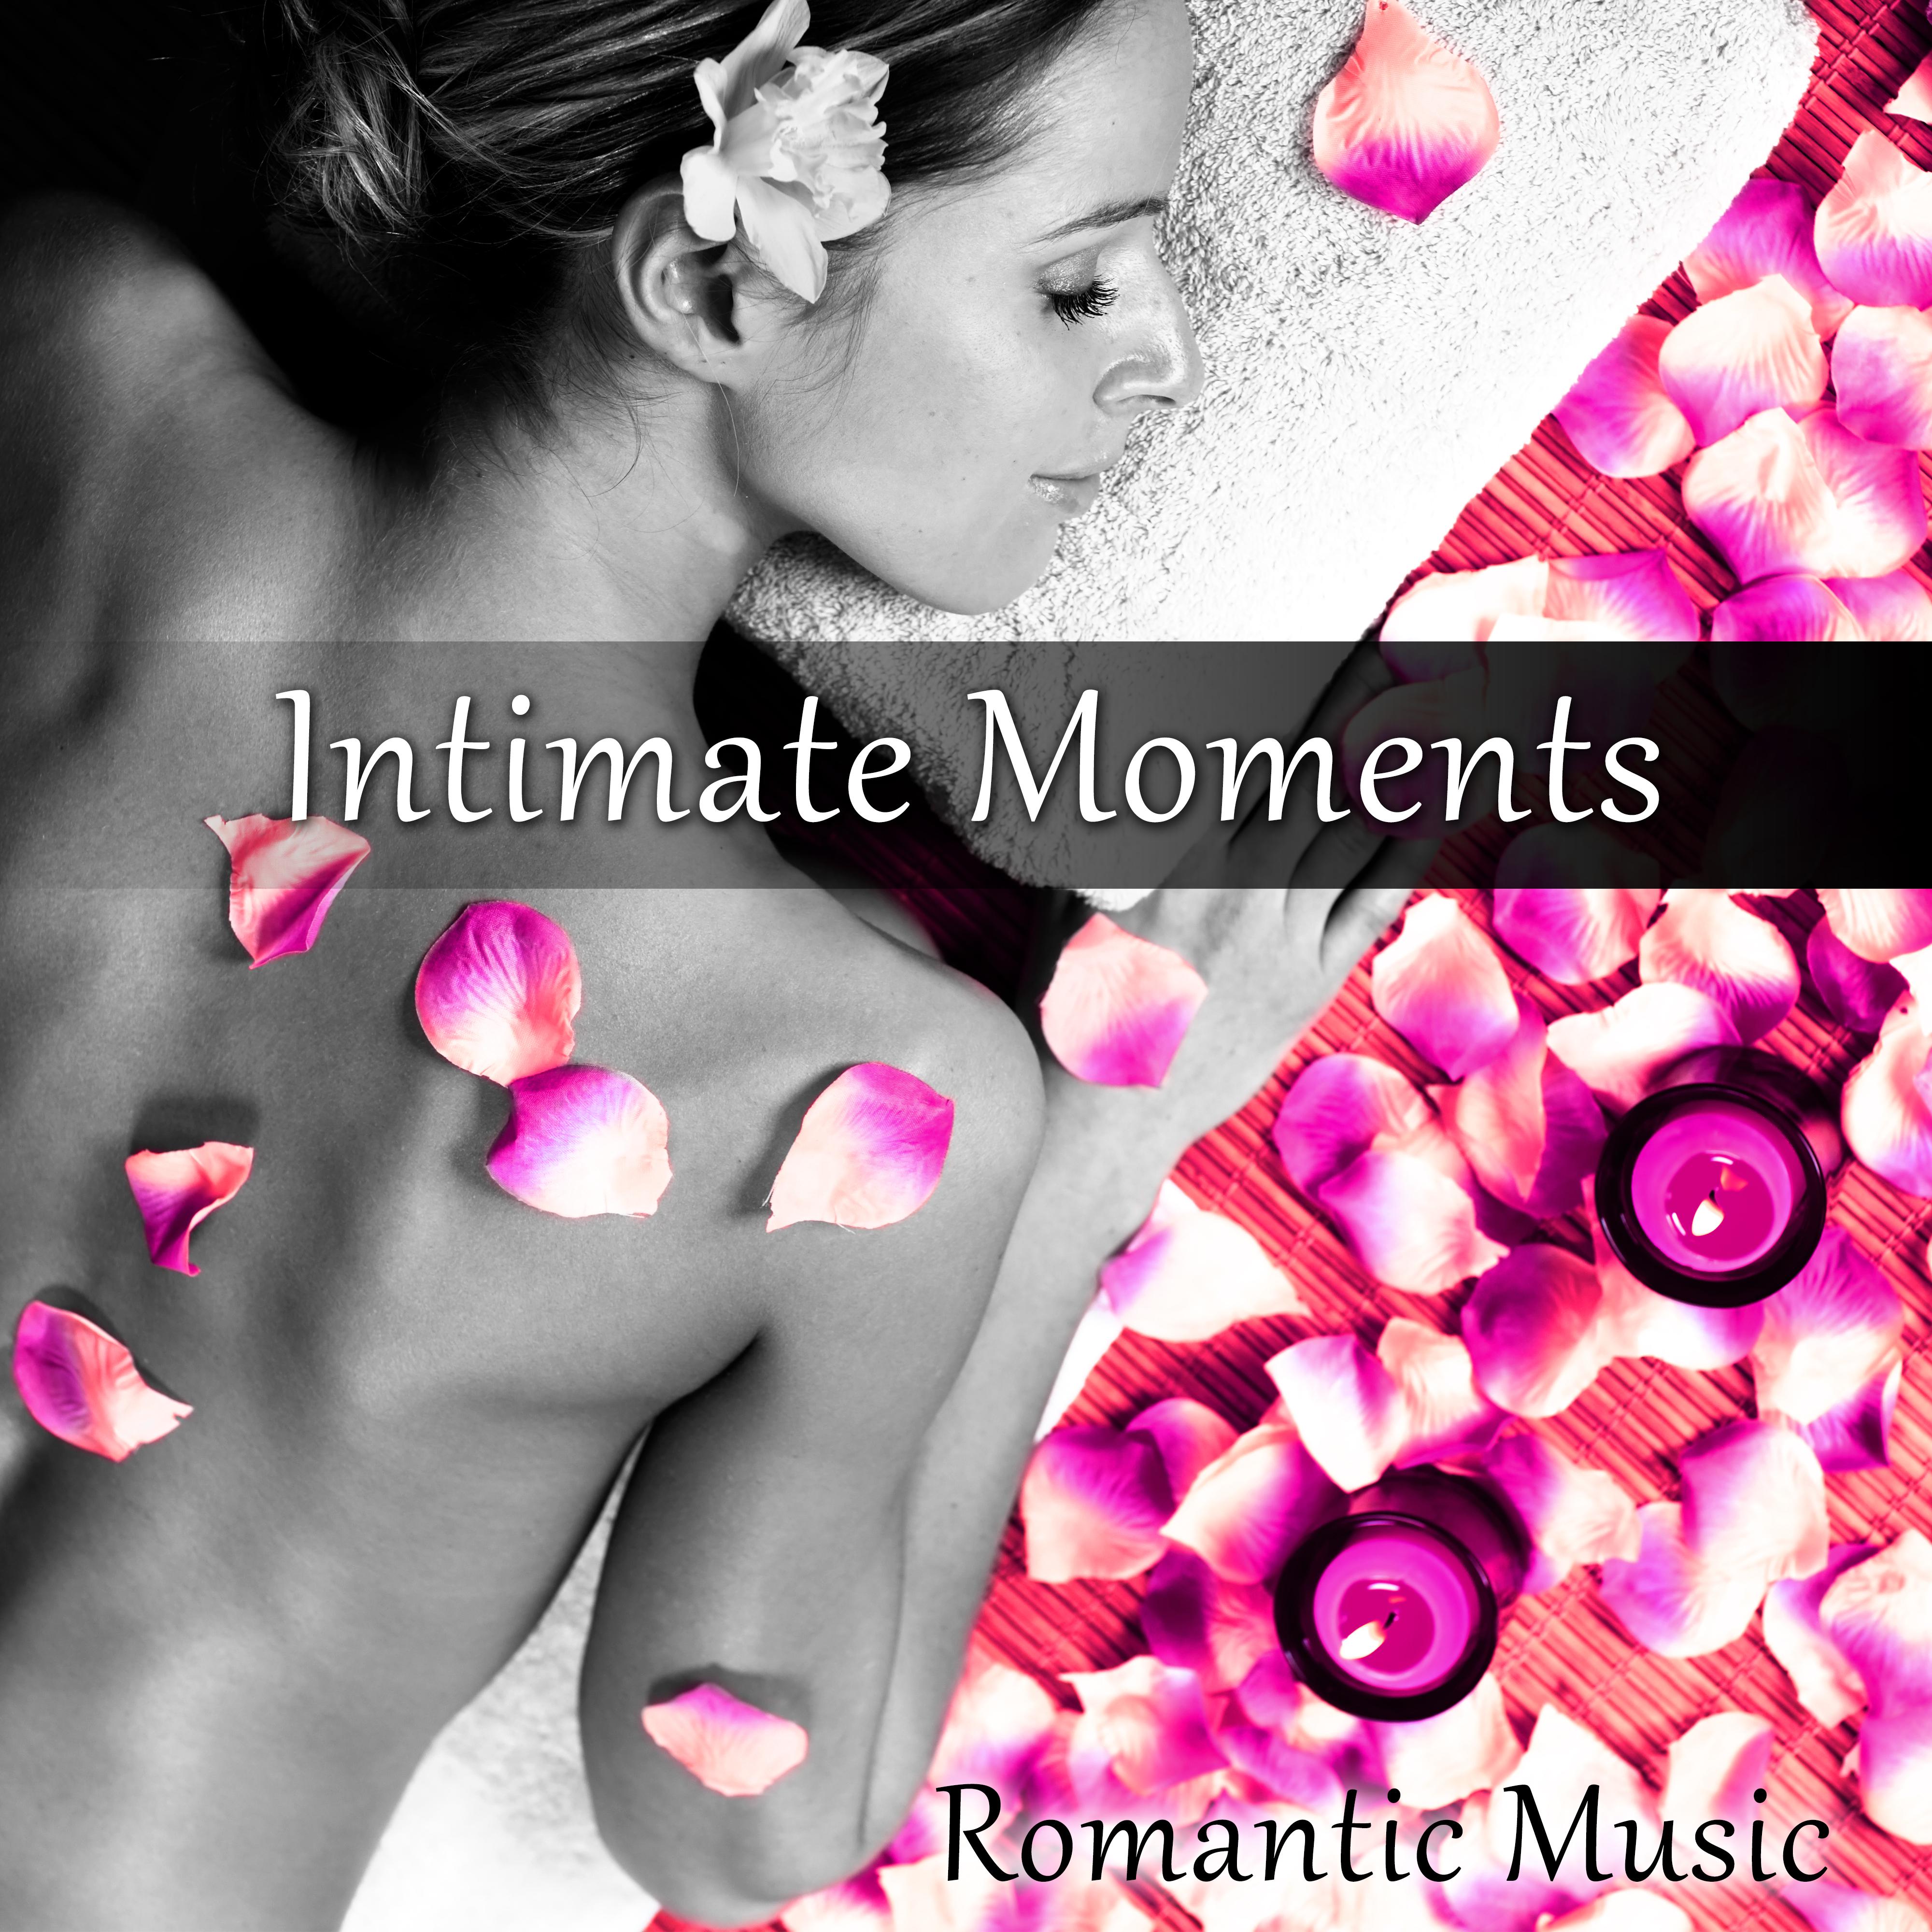 Intimate Moments - Romantic Music, Background Piano, **** Songs, Coktail Piano Bar, Dinner Party